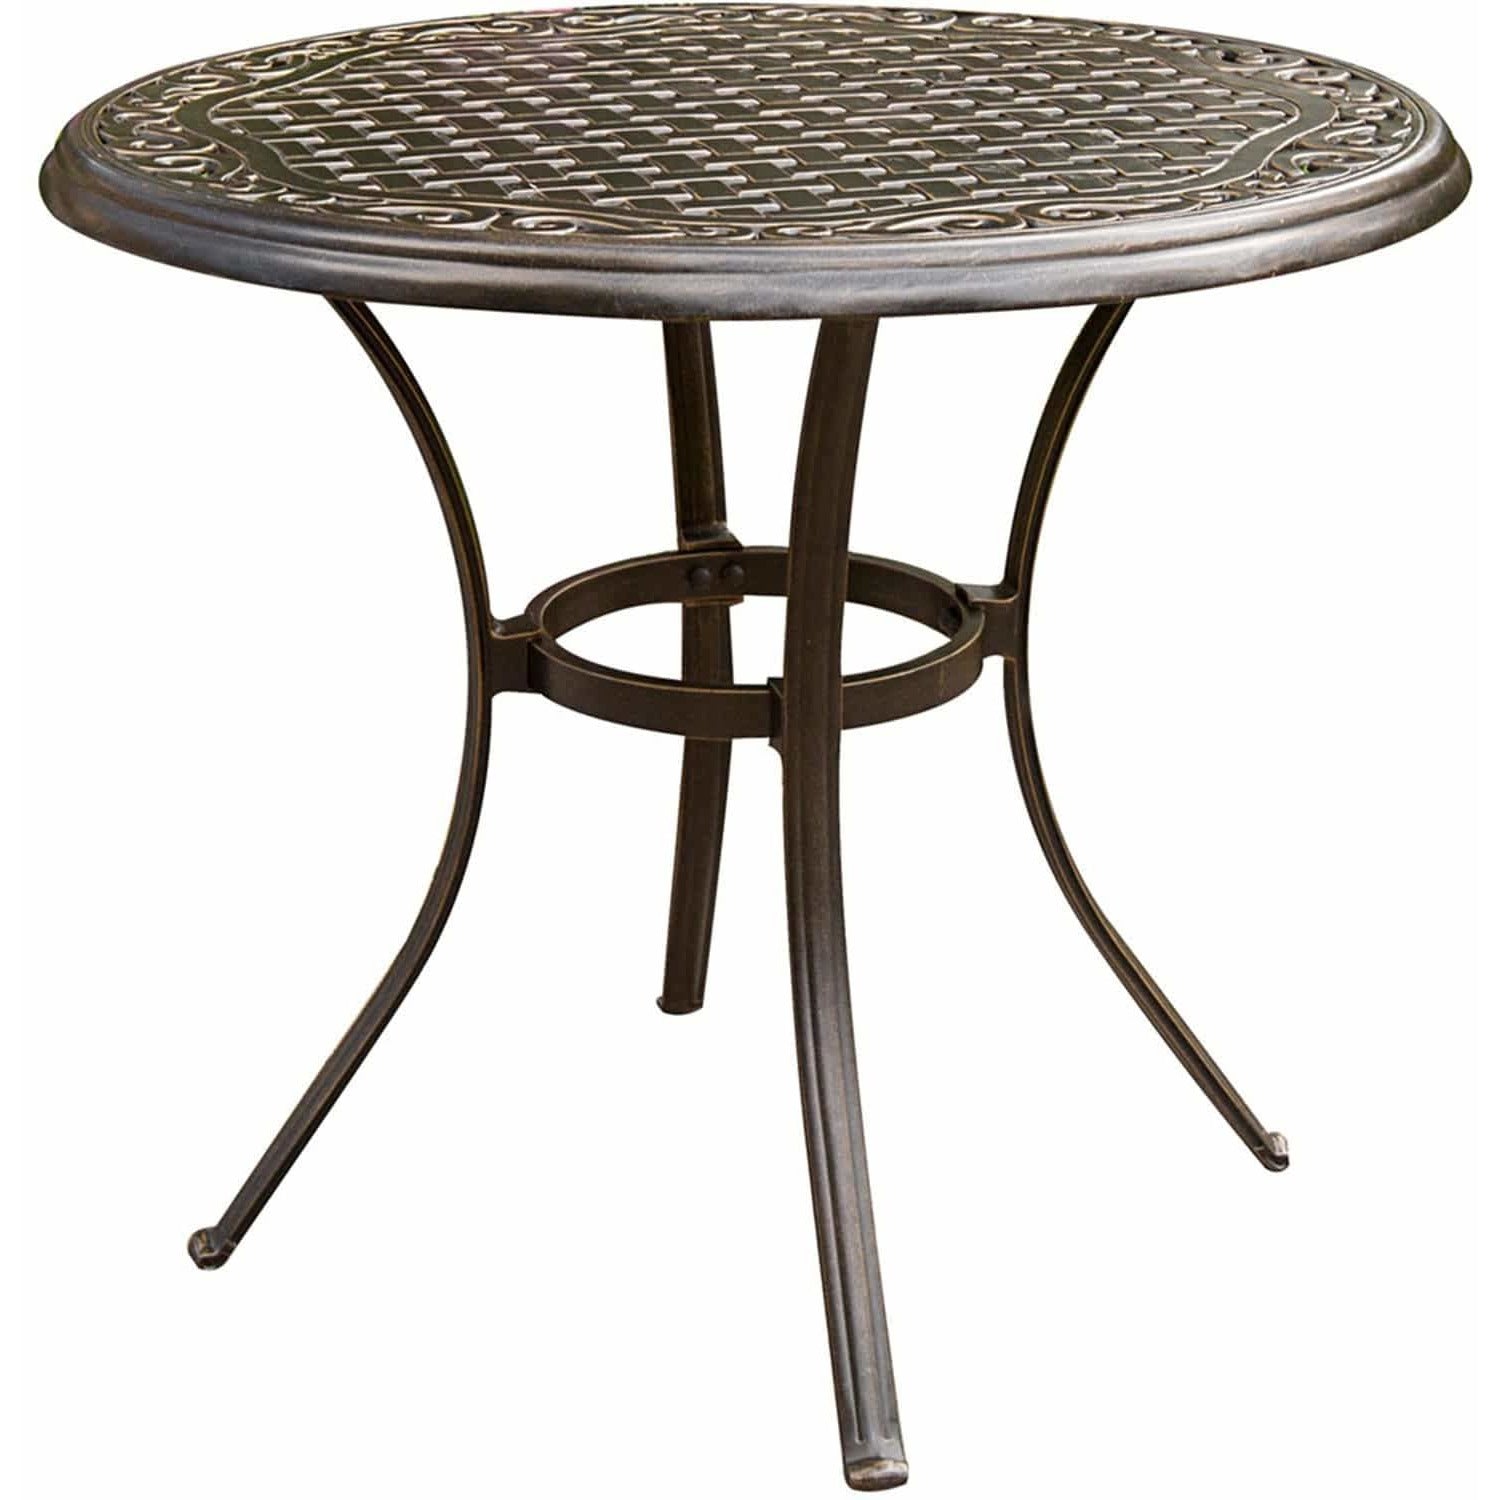 Hammond Adams 3pc outdoor dining set 2 swivel rockers and round table - M&K Grills